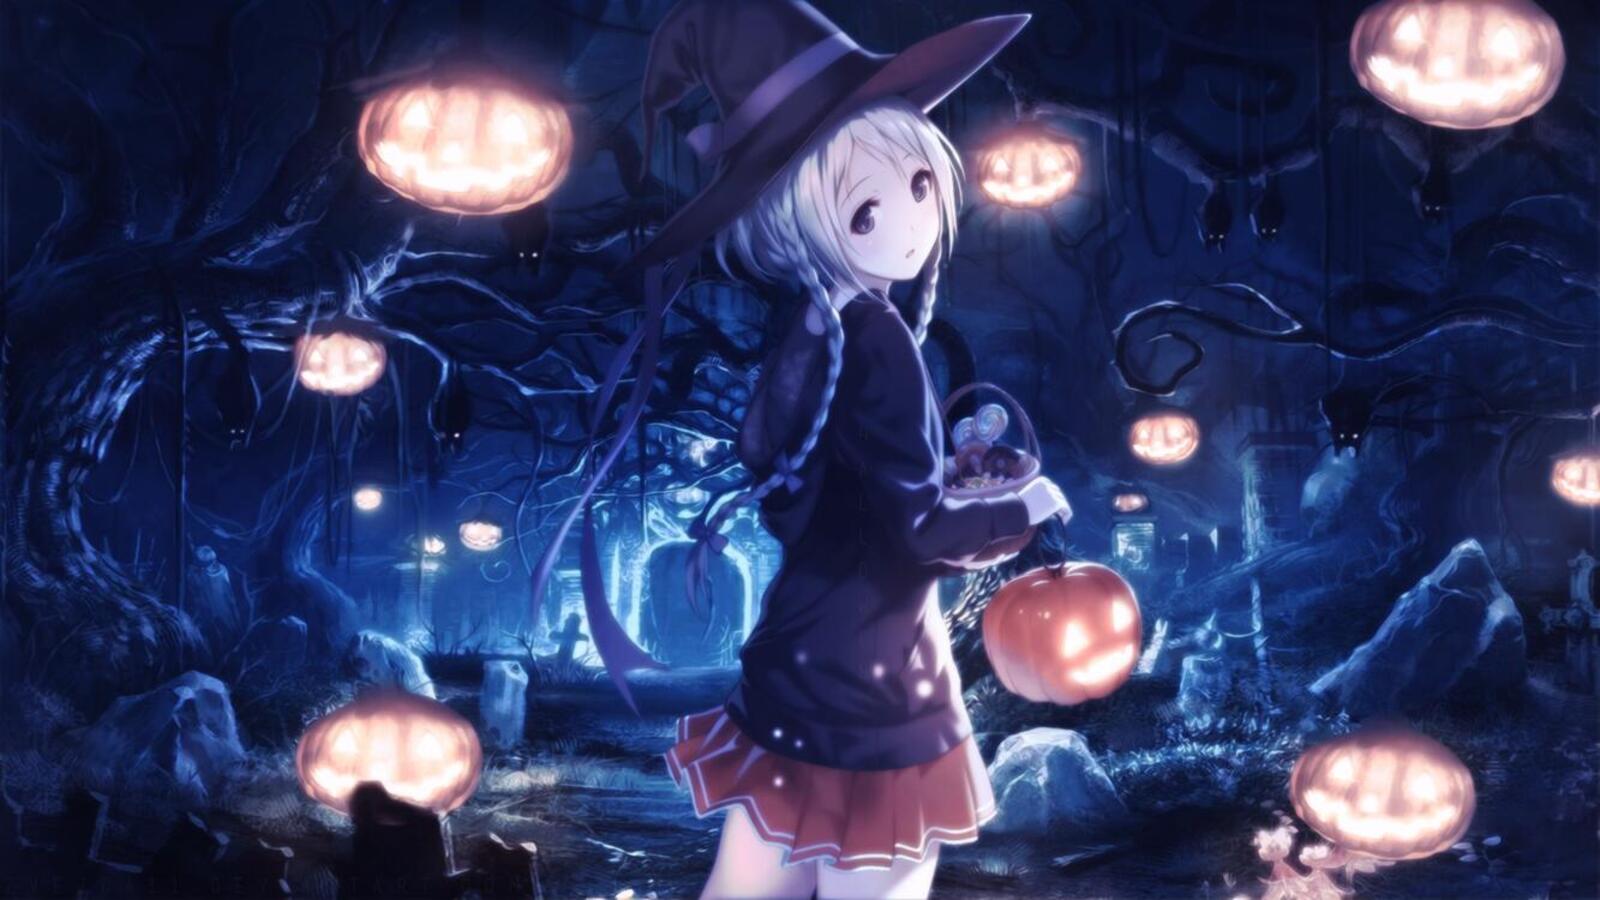 Wallpapers wallpaper anime girl witch hat white hair on the desktop